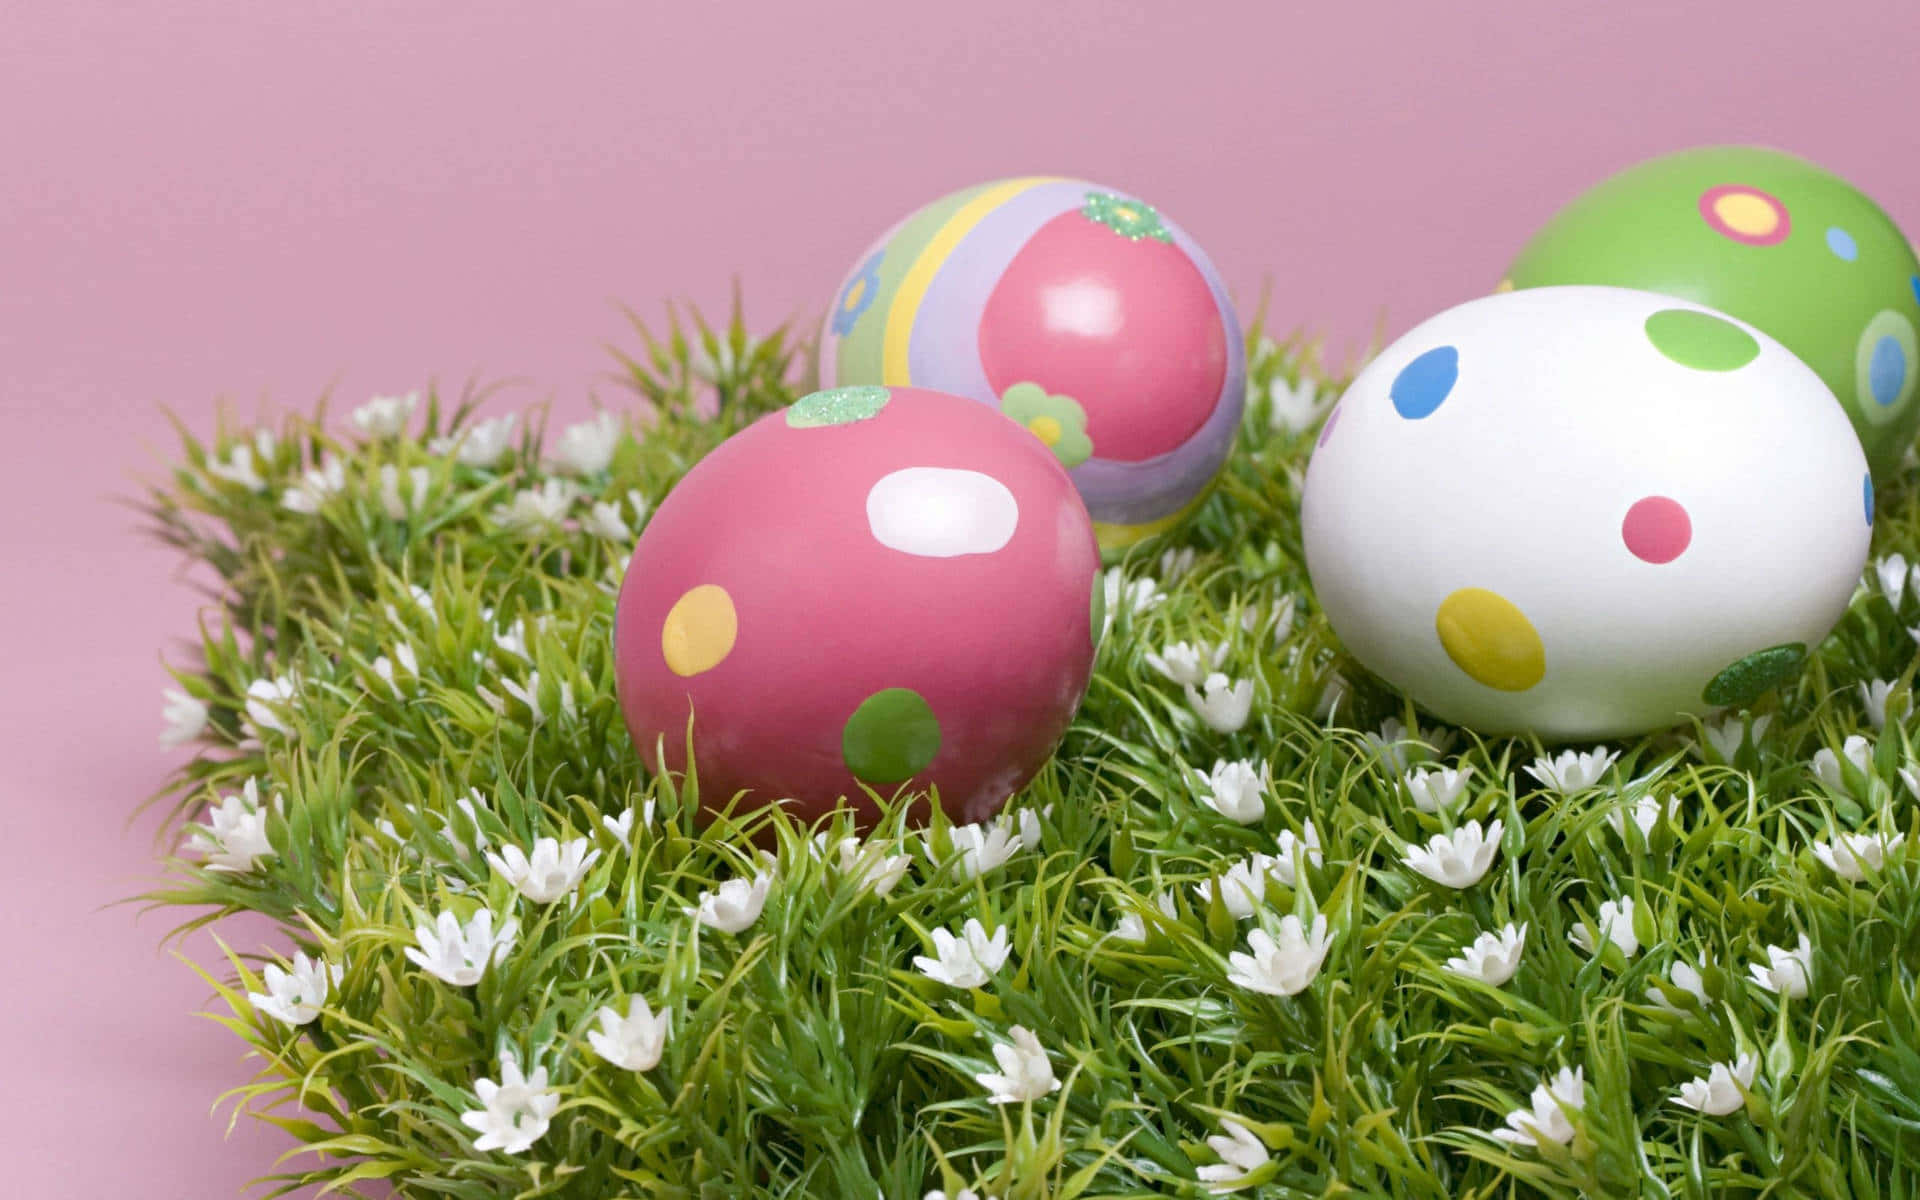 Adorable Easter Bunny Surrounded by Colorful Eggs